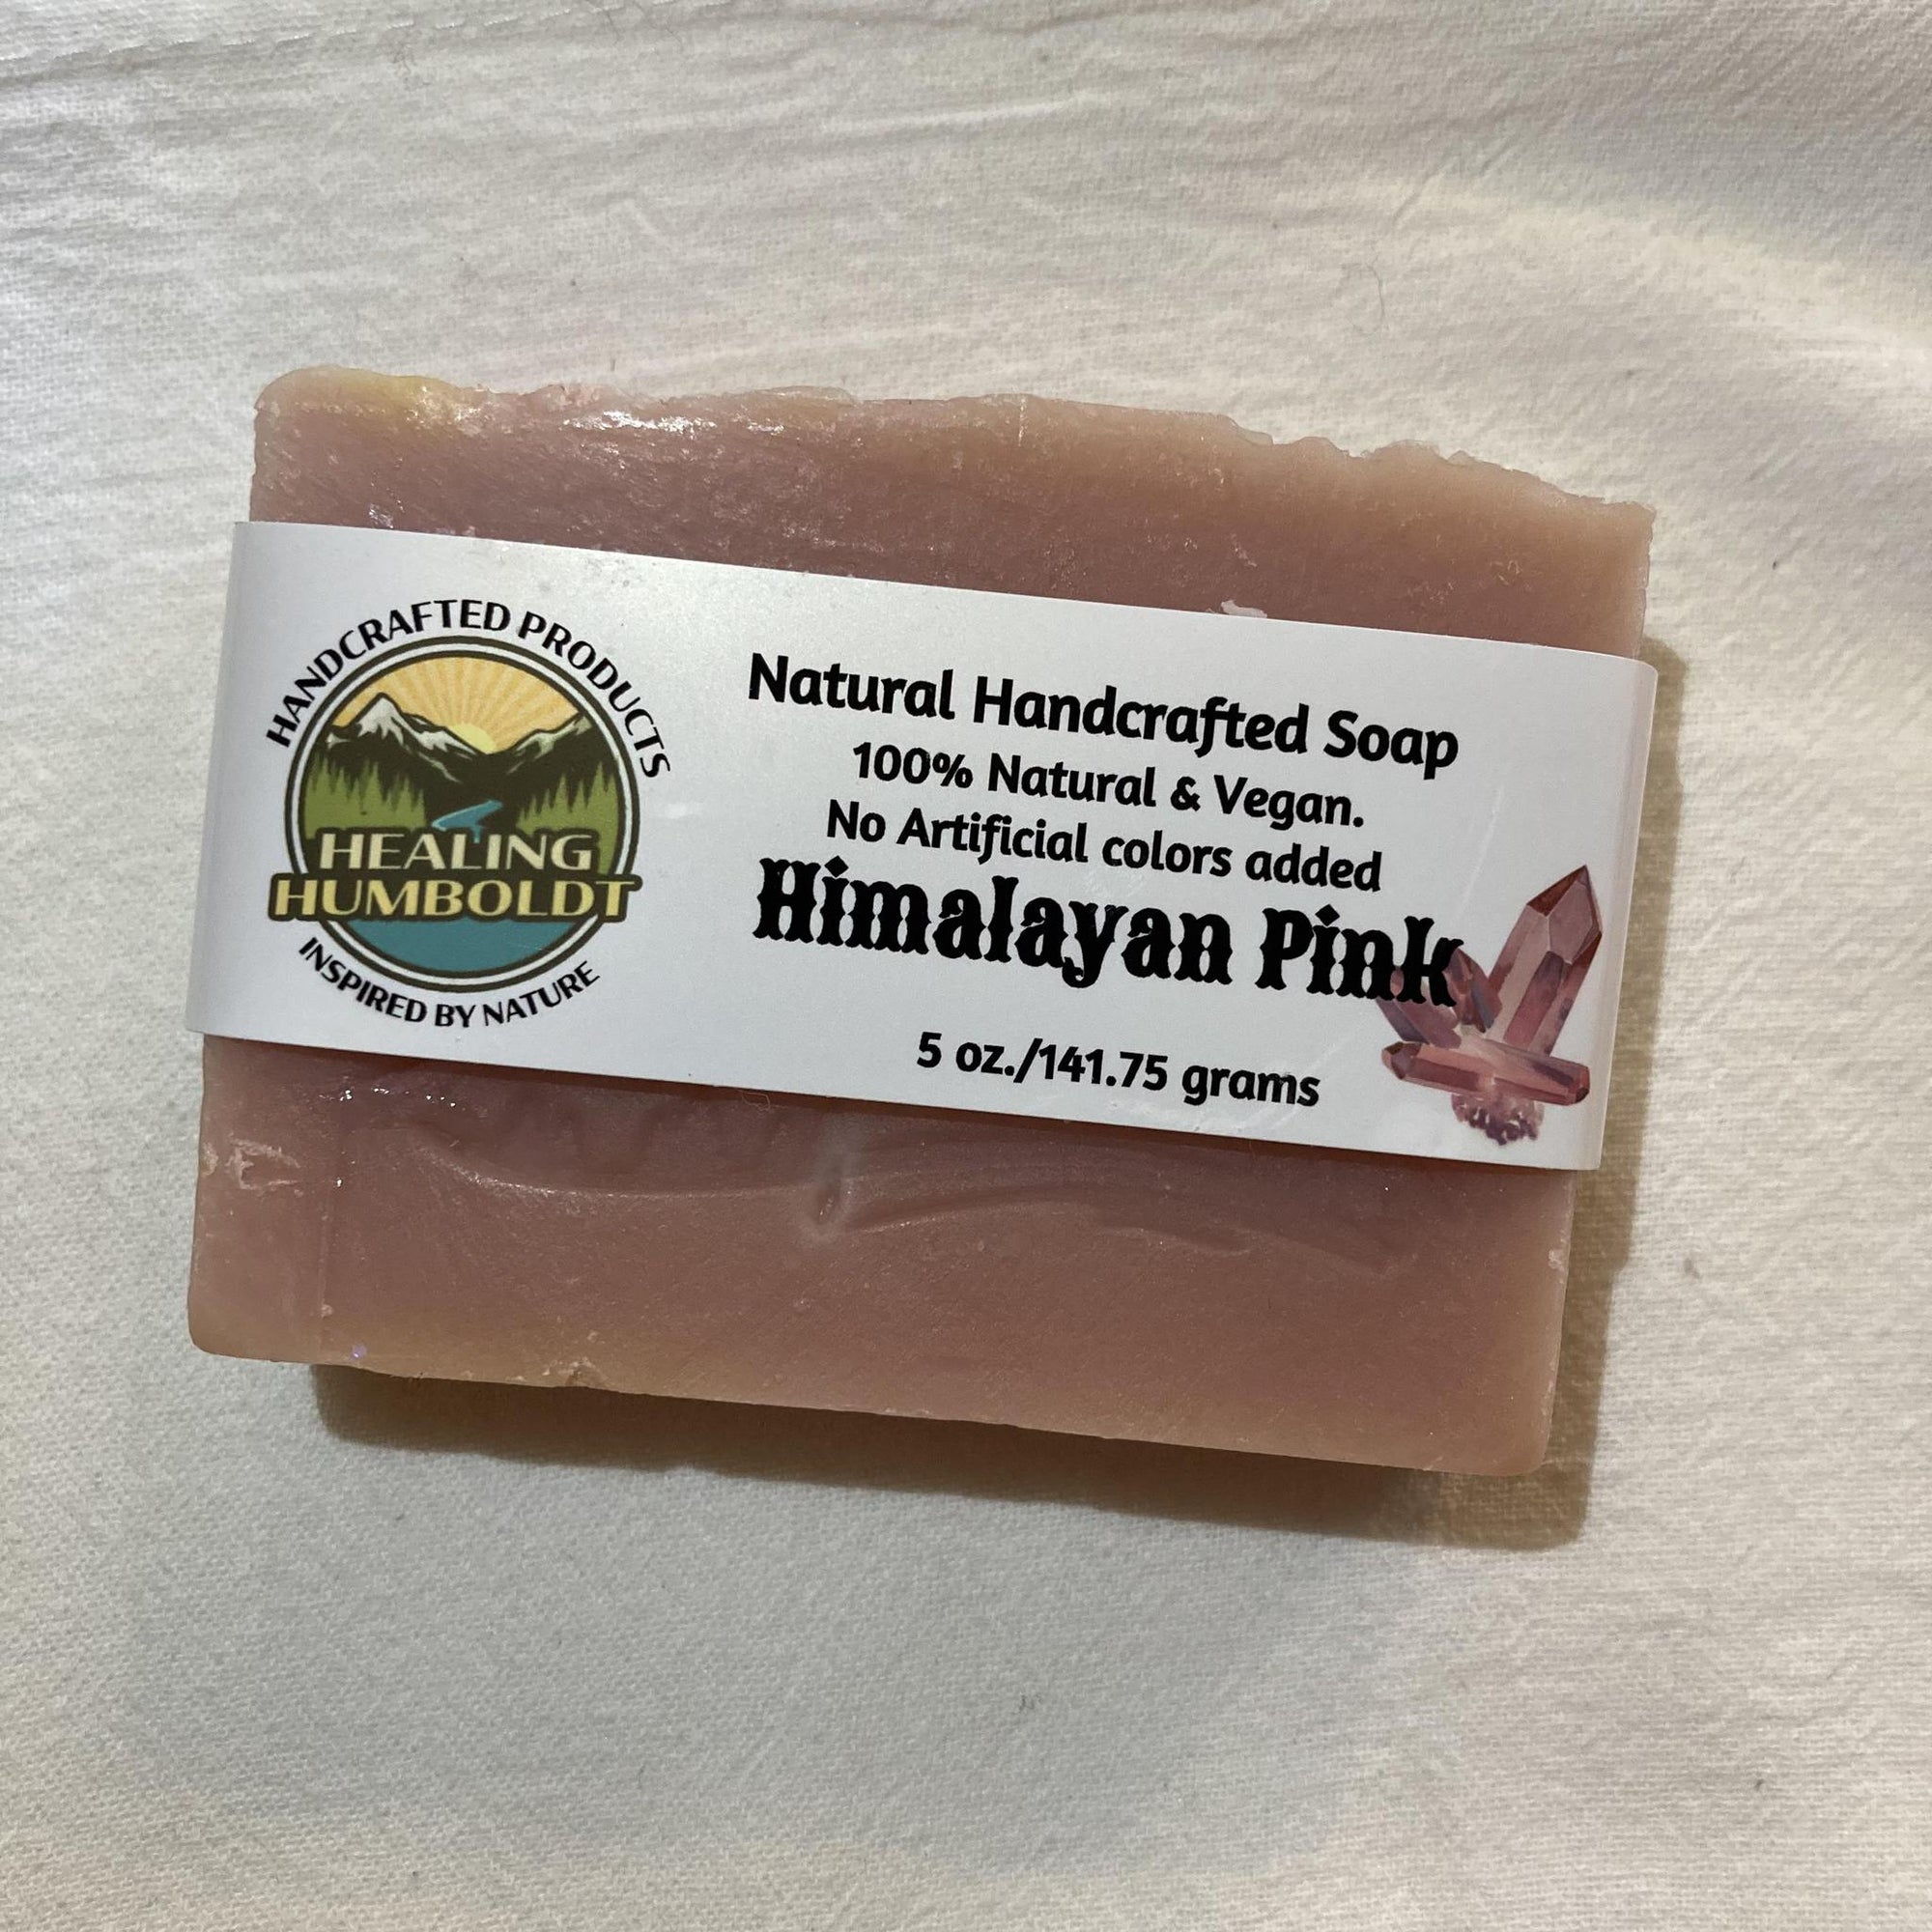 Healing Humboldt Handcrafted Soap | Himalayan Pink